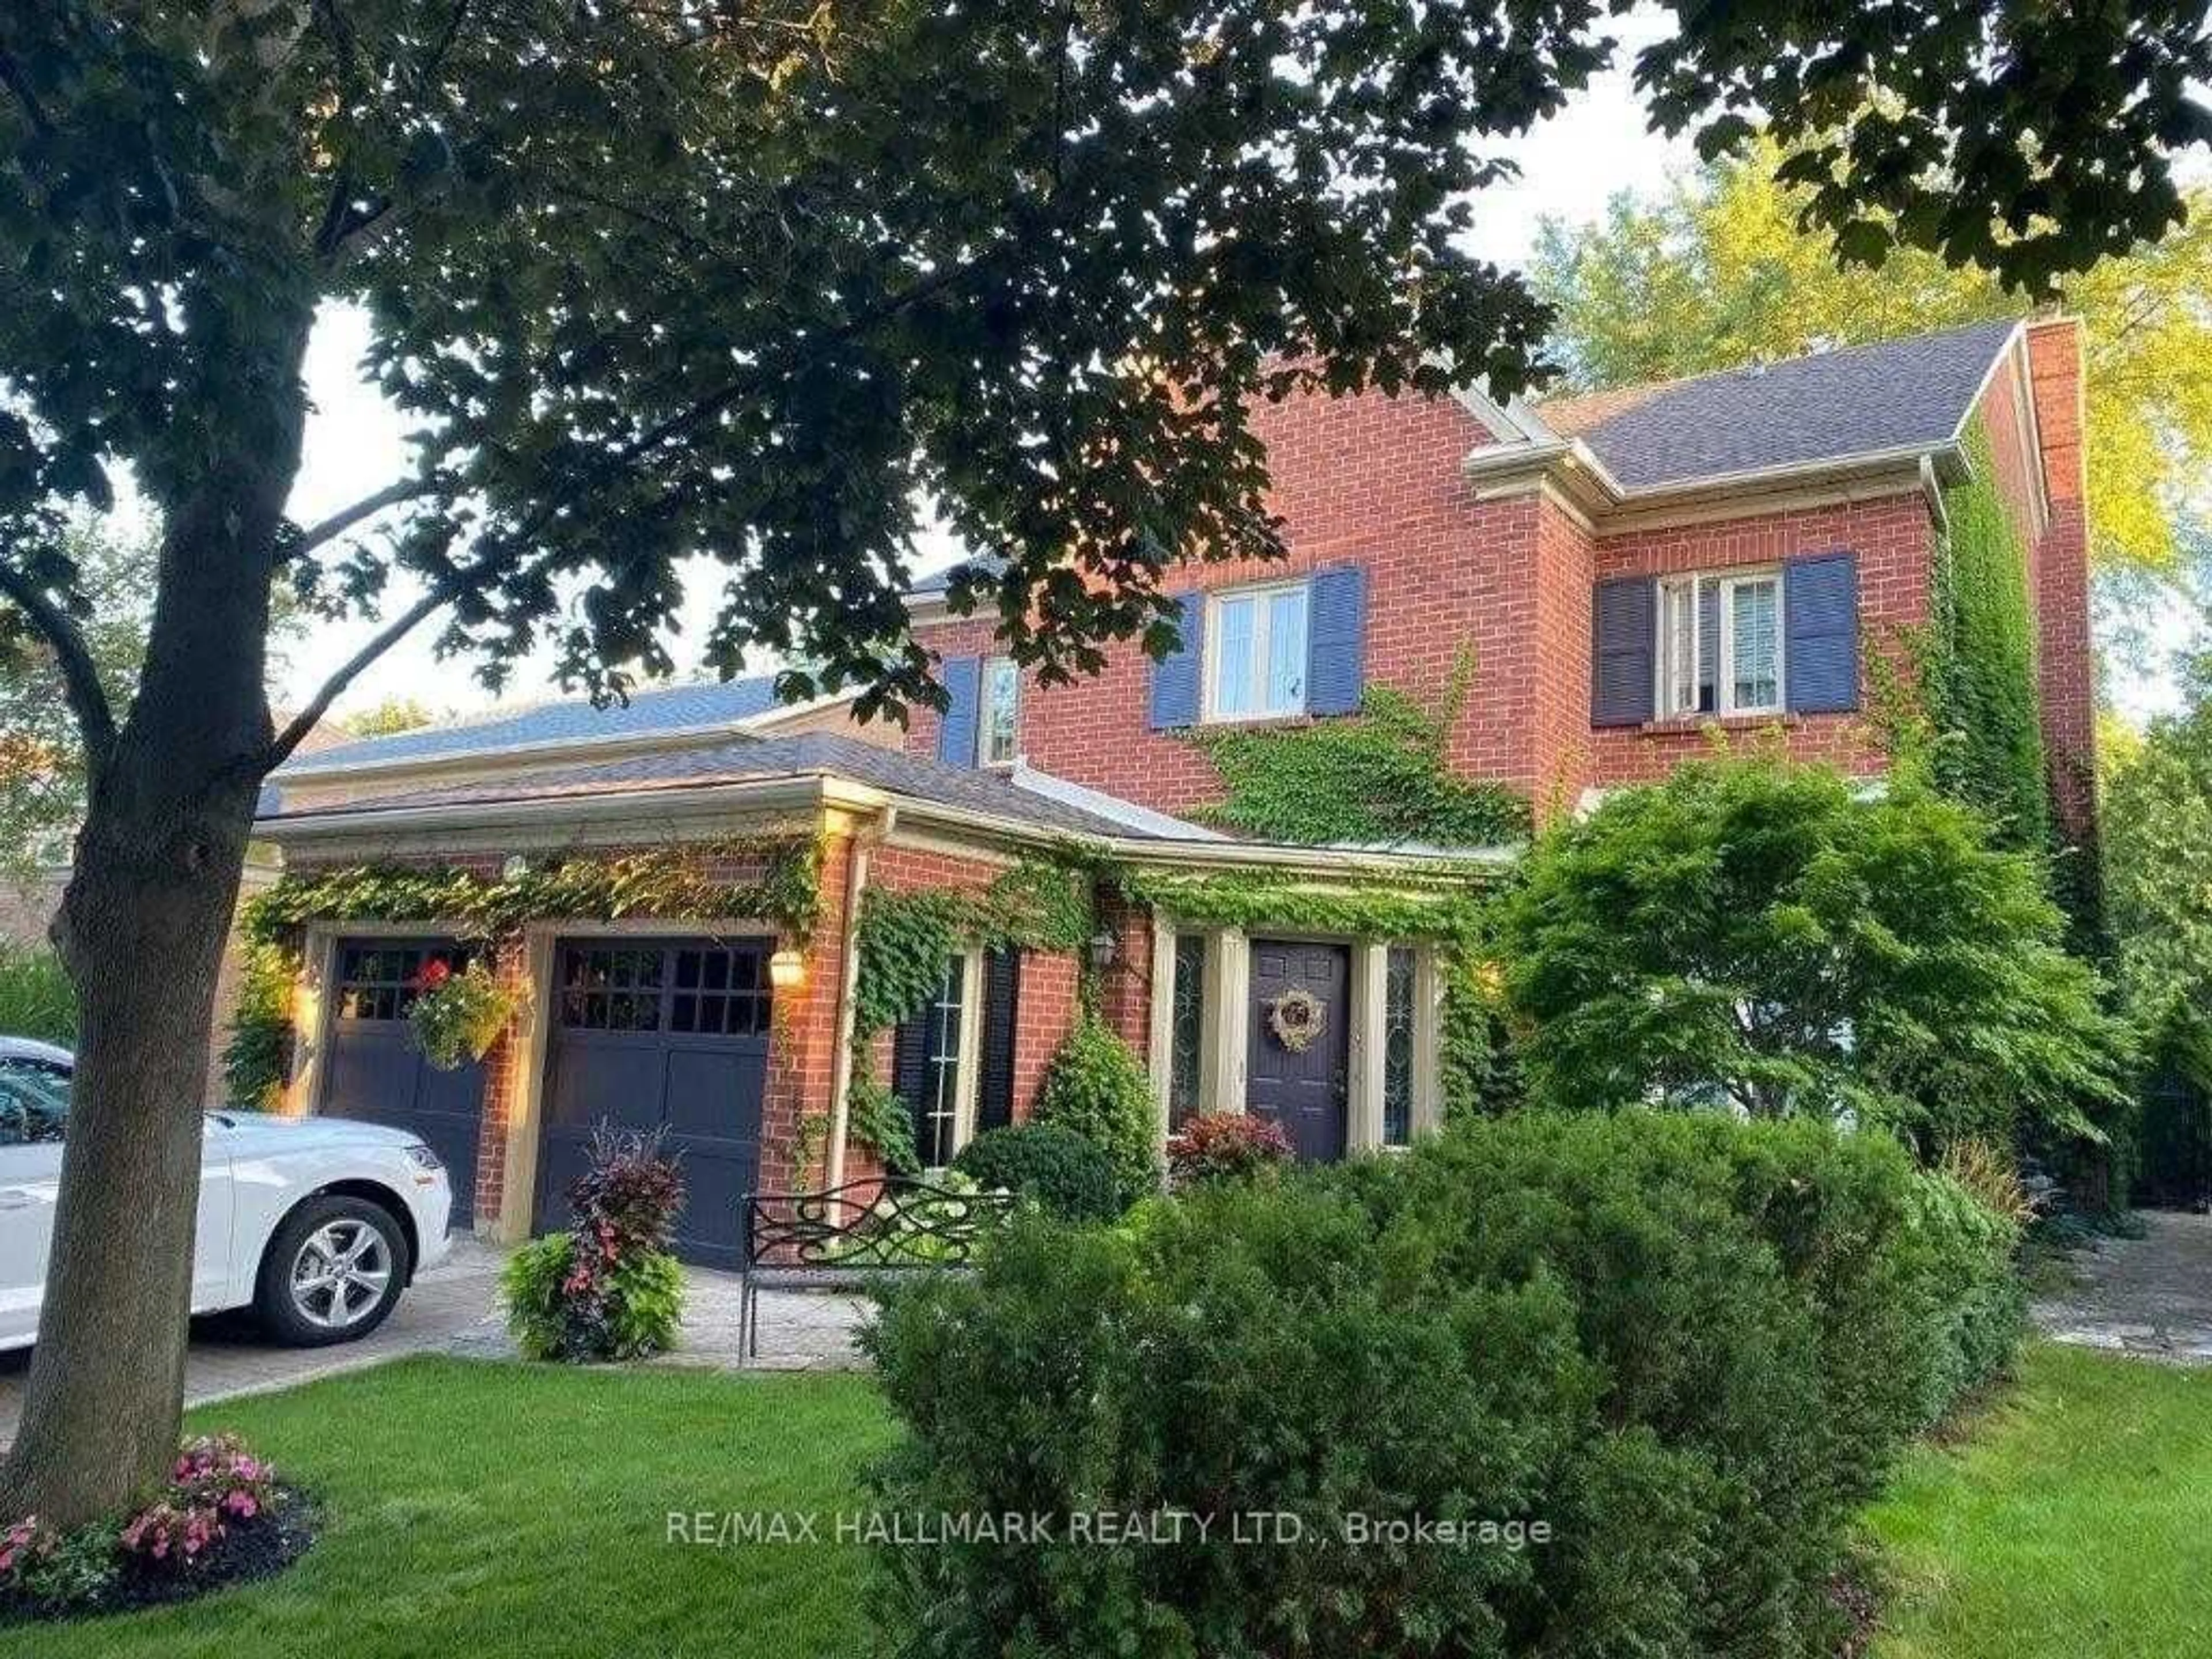 Home with brick exterior material for 34 Willett Cres, Richmond Hill Ontario L4C 7W1